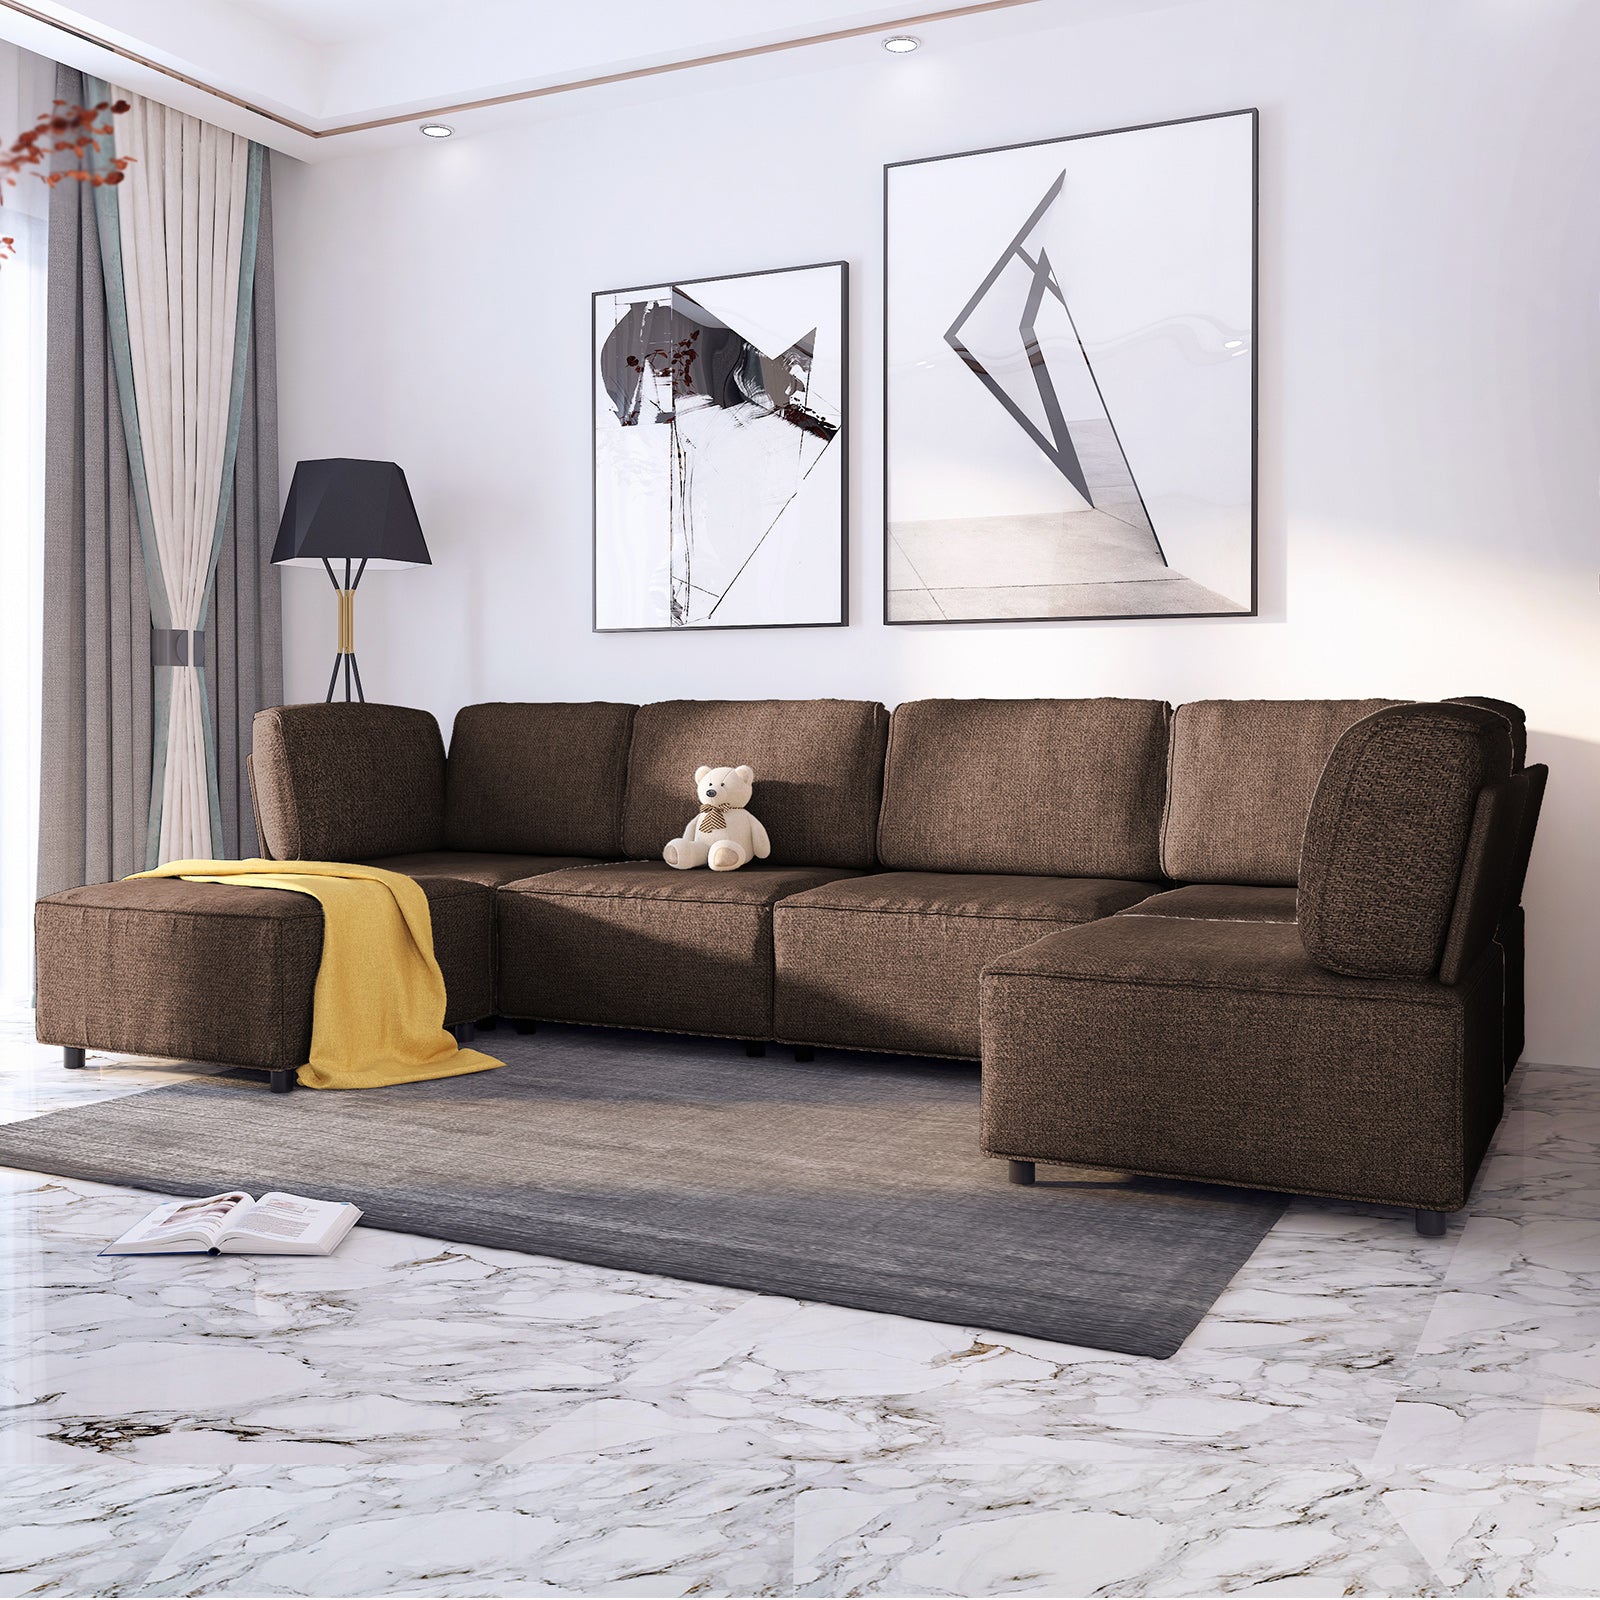 Cecer U/L Shaped Modular Convertible Sectional Sofa with Ottoman